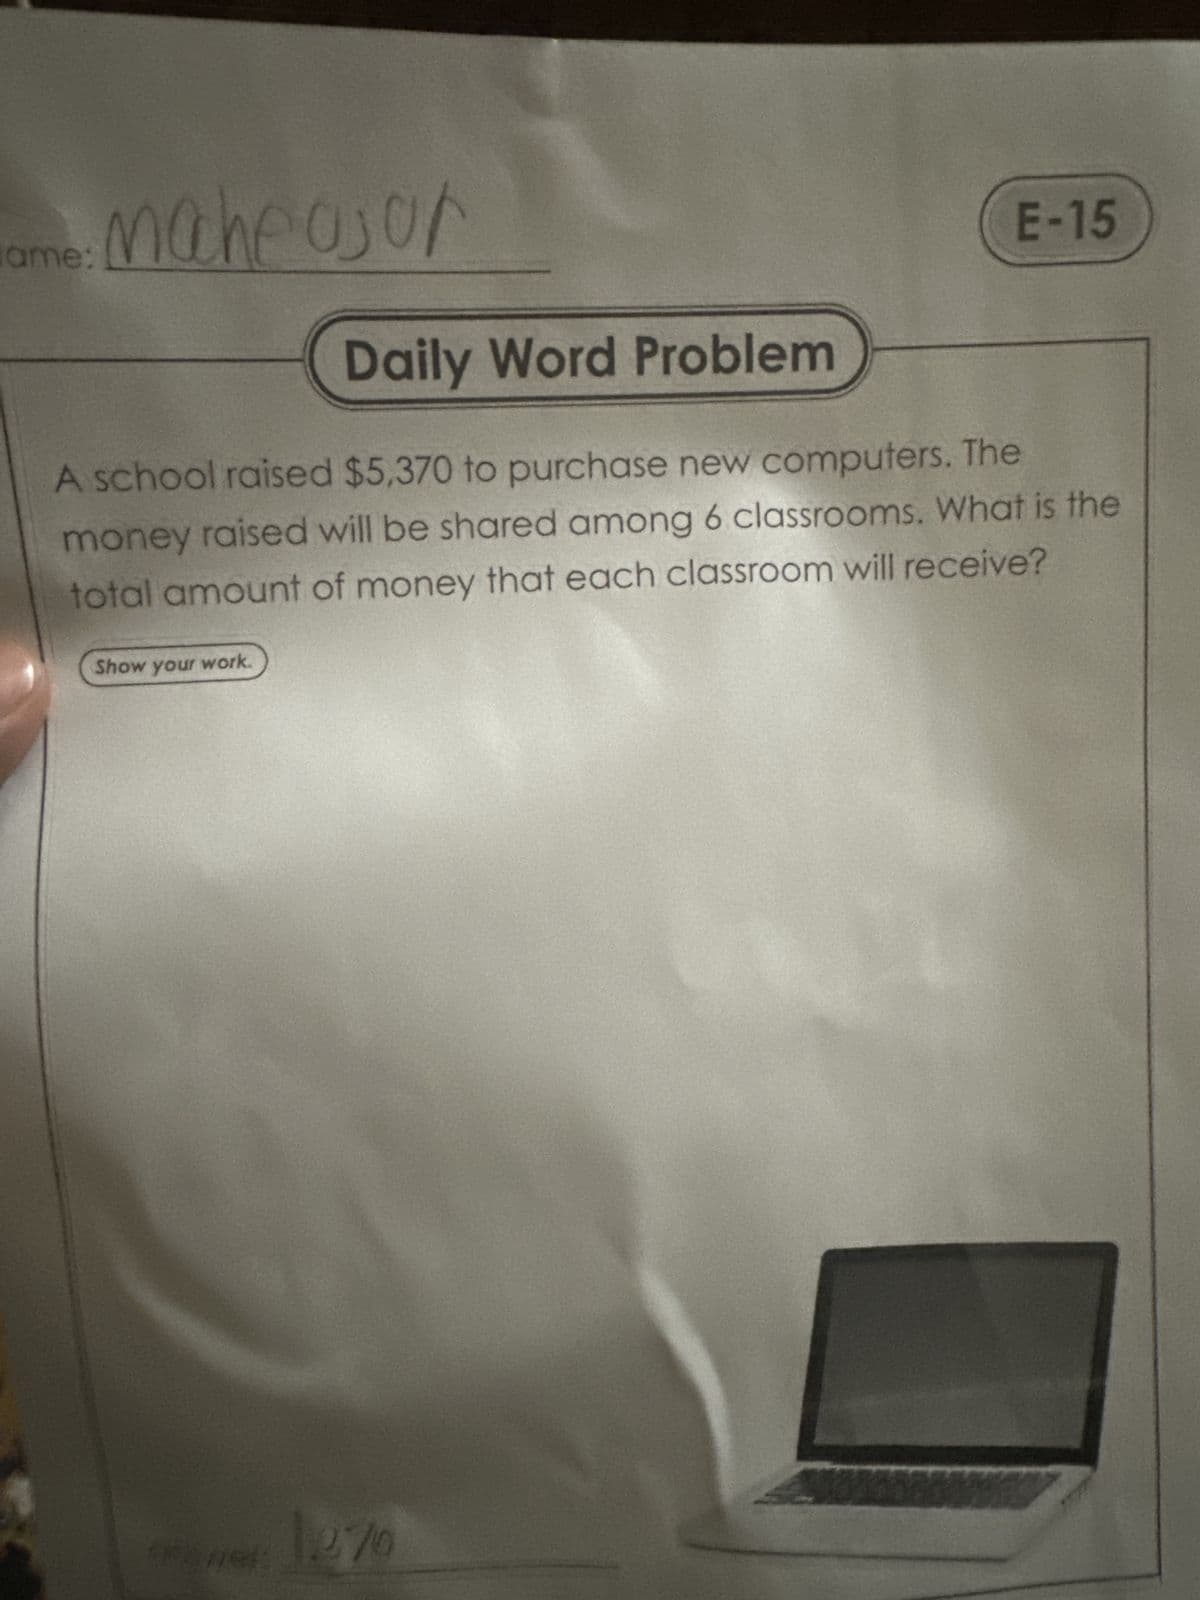 maheajon
ame:
E-15
Daily Word Problem
A school raised $5,370 to purchase new computers. The
money raised will be shared among 6 classrooms. What is the
total amount of money that each classroom will receive?
Show your work.
270